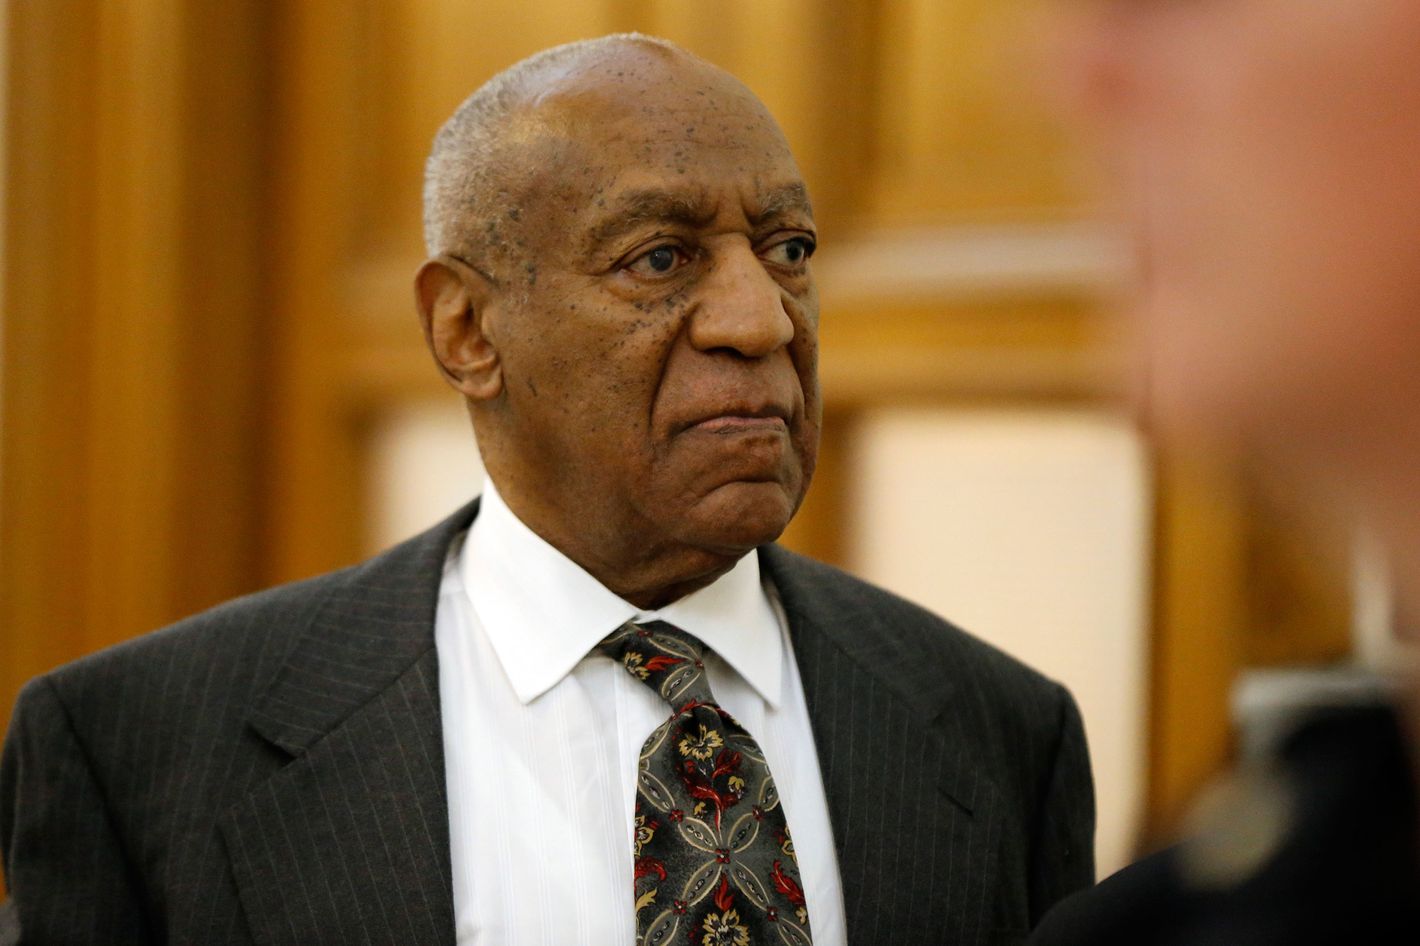 Bill Cosby Daughter Porn - Bill Cosby: Racism Might Have Motivated Assault Accusations